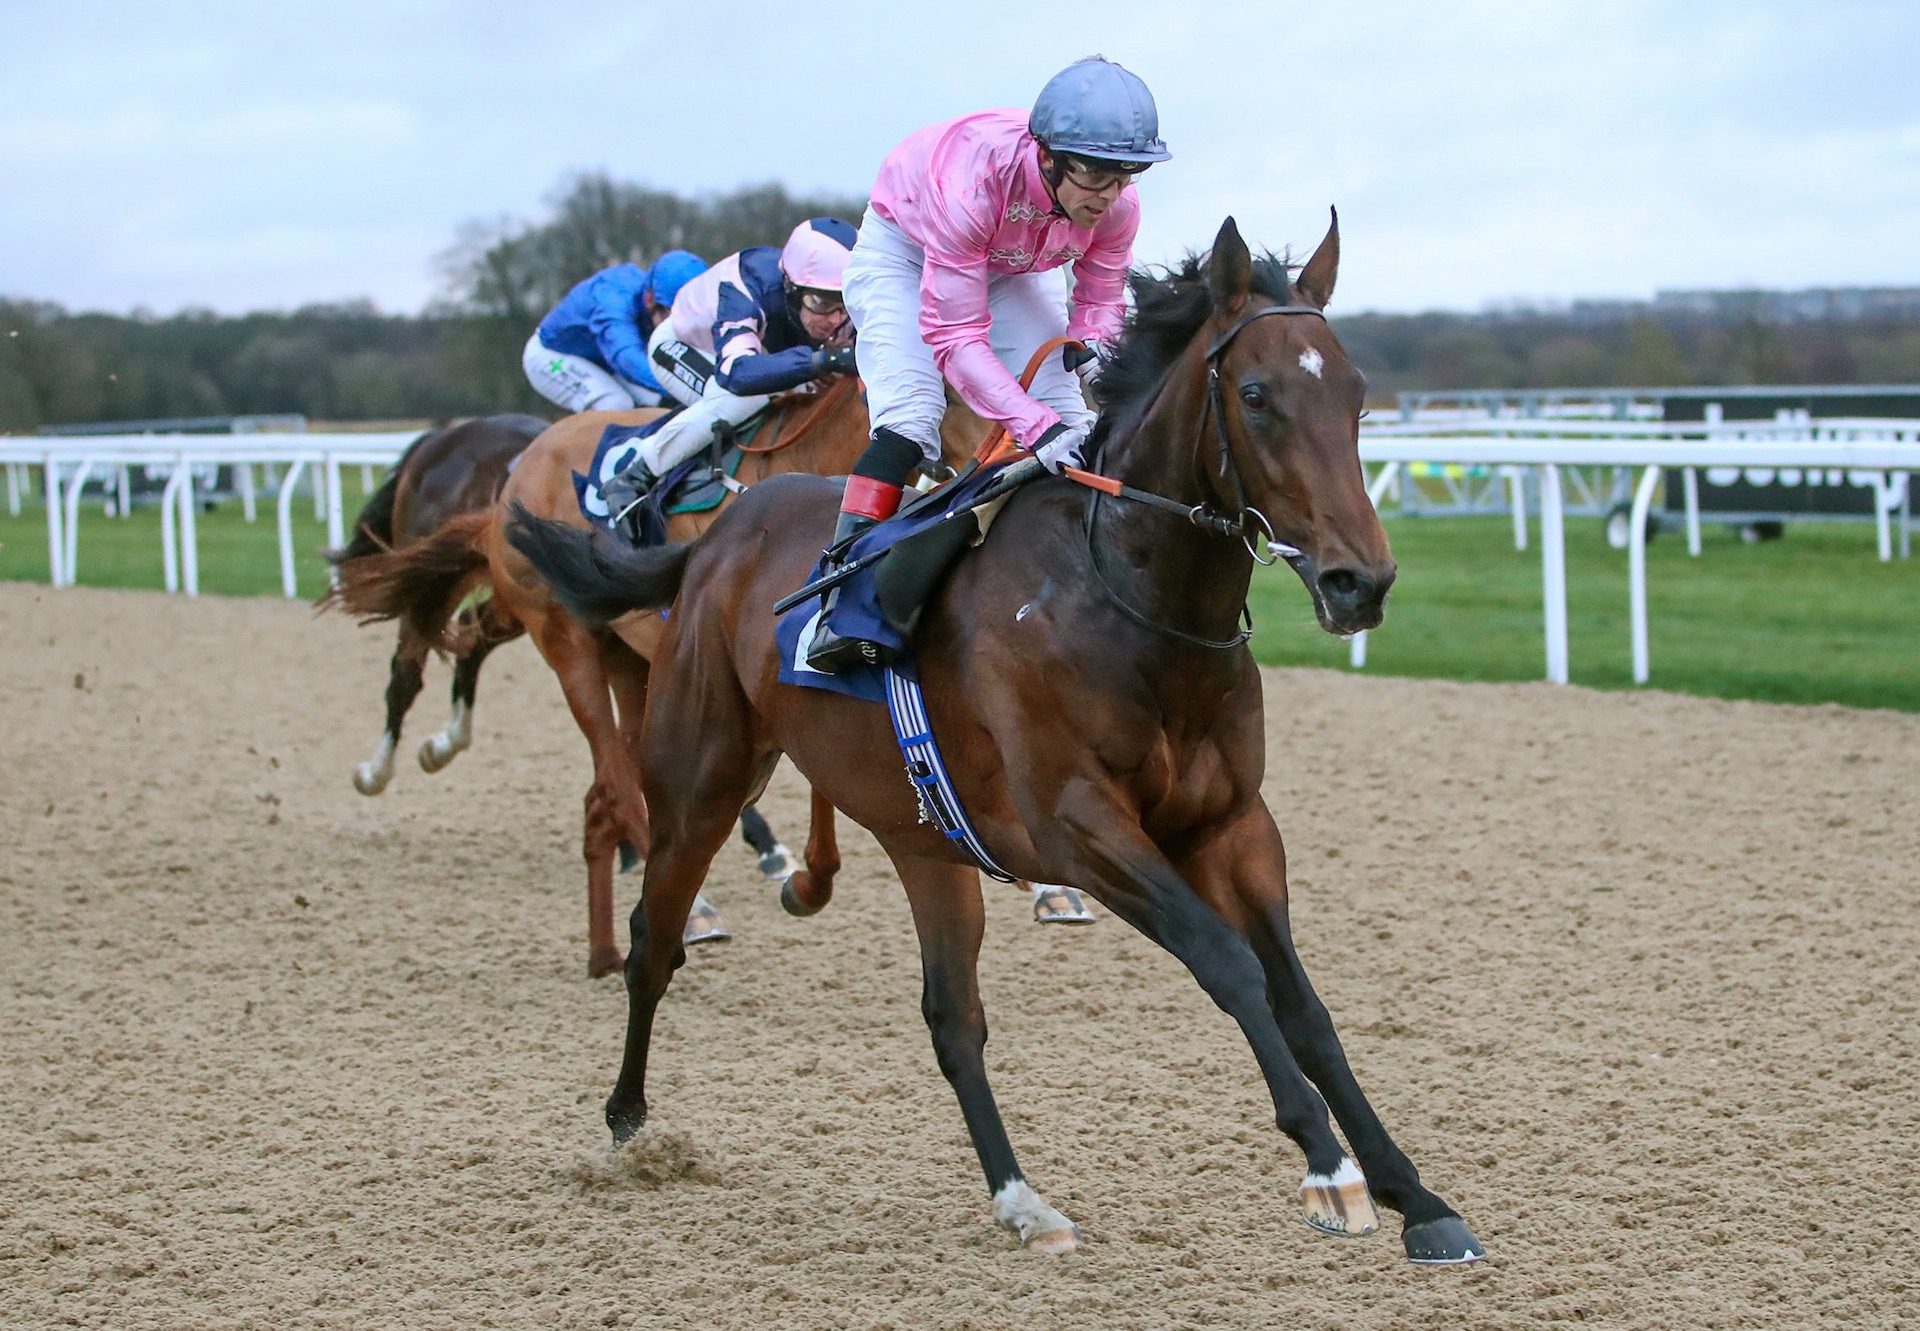 London Arch Becomes The Latest Winner By Fastnet Rock